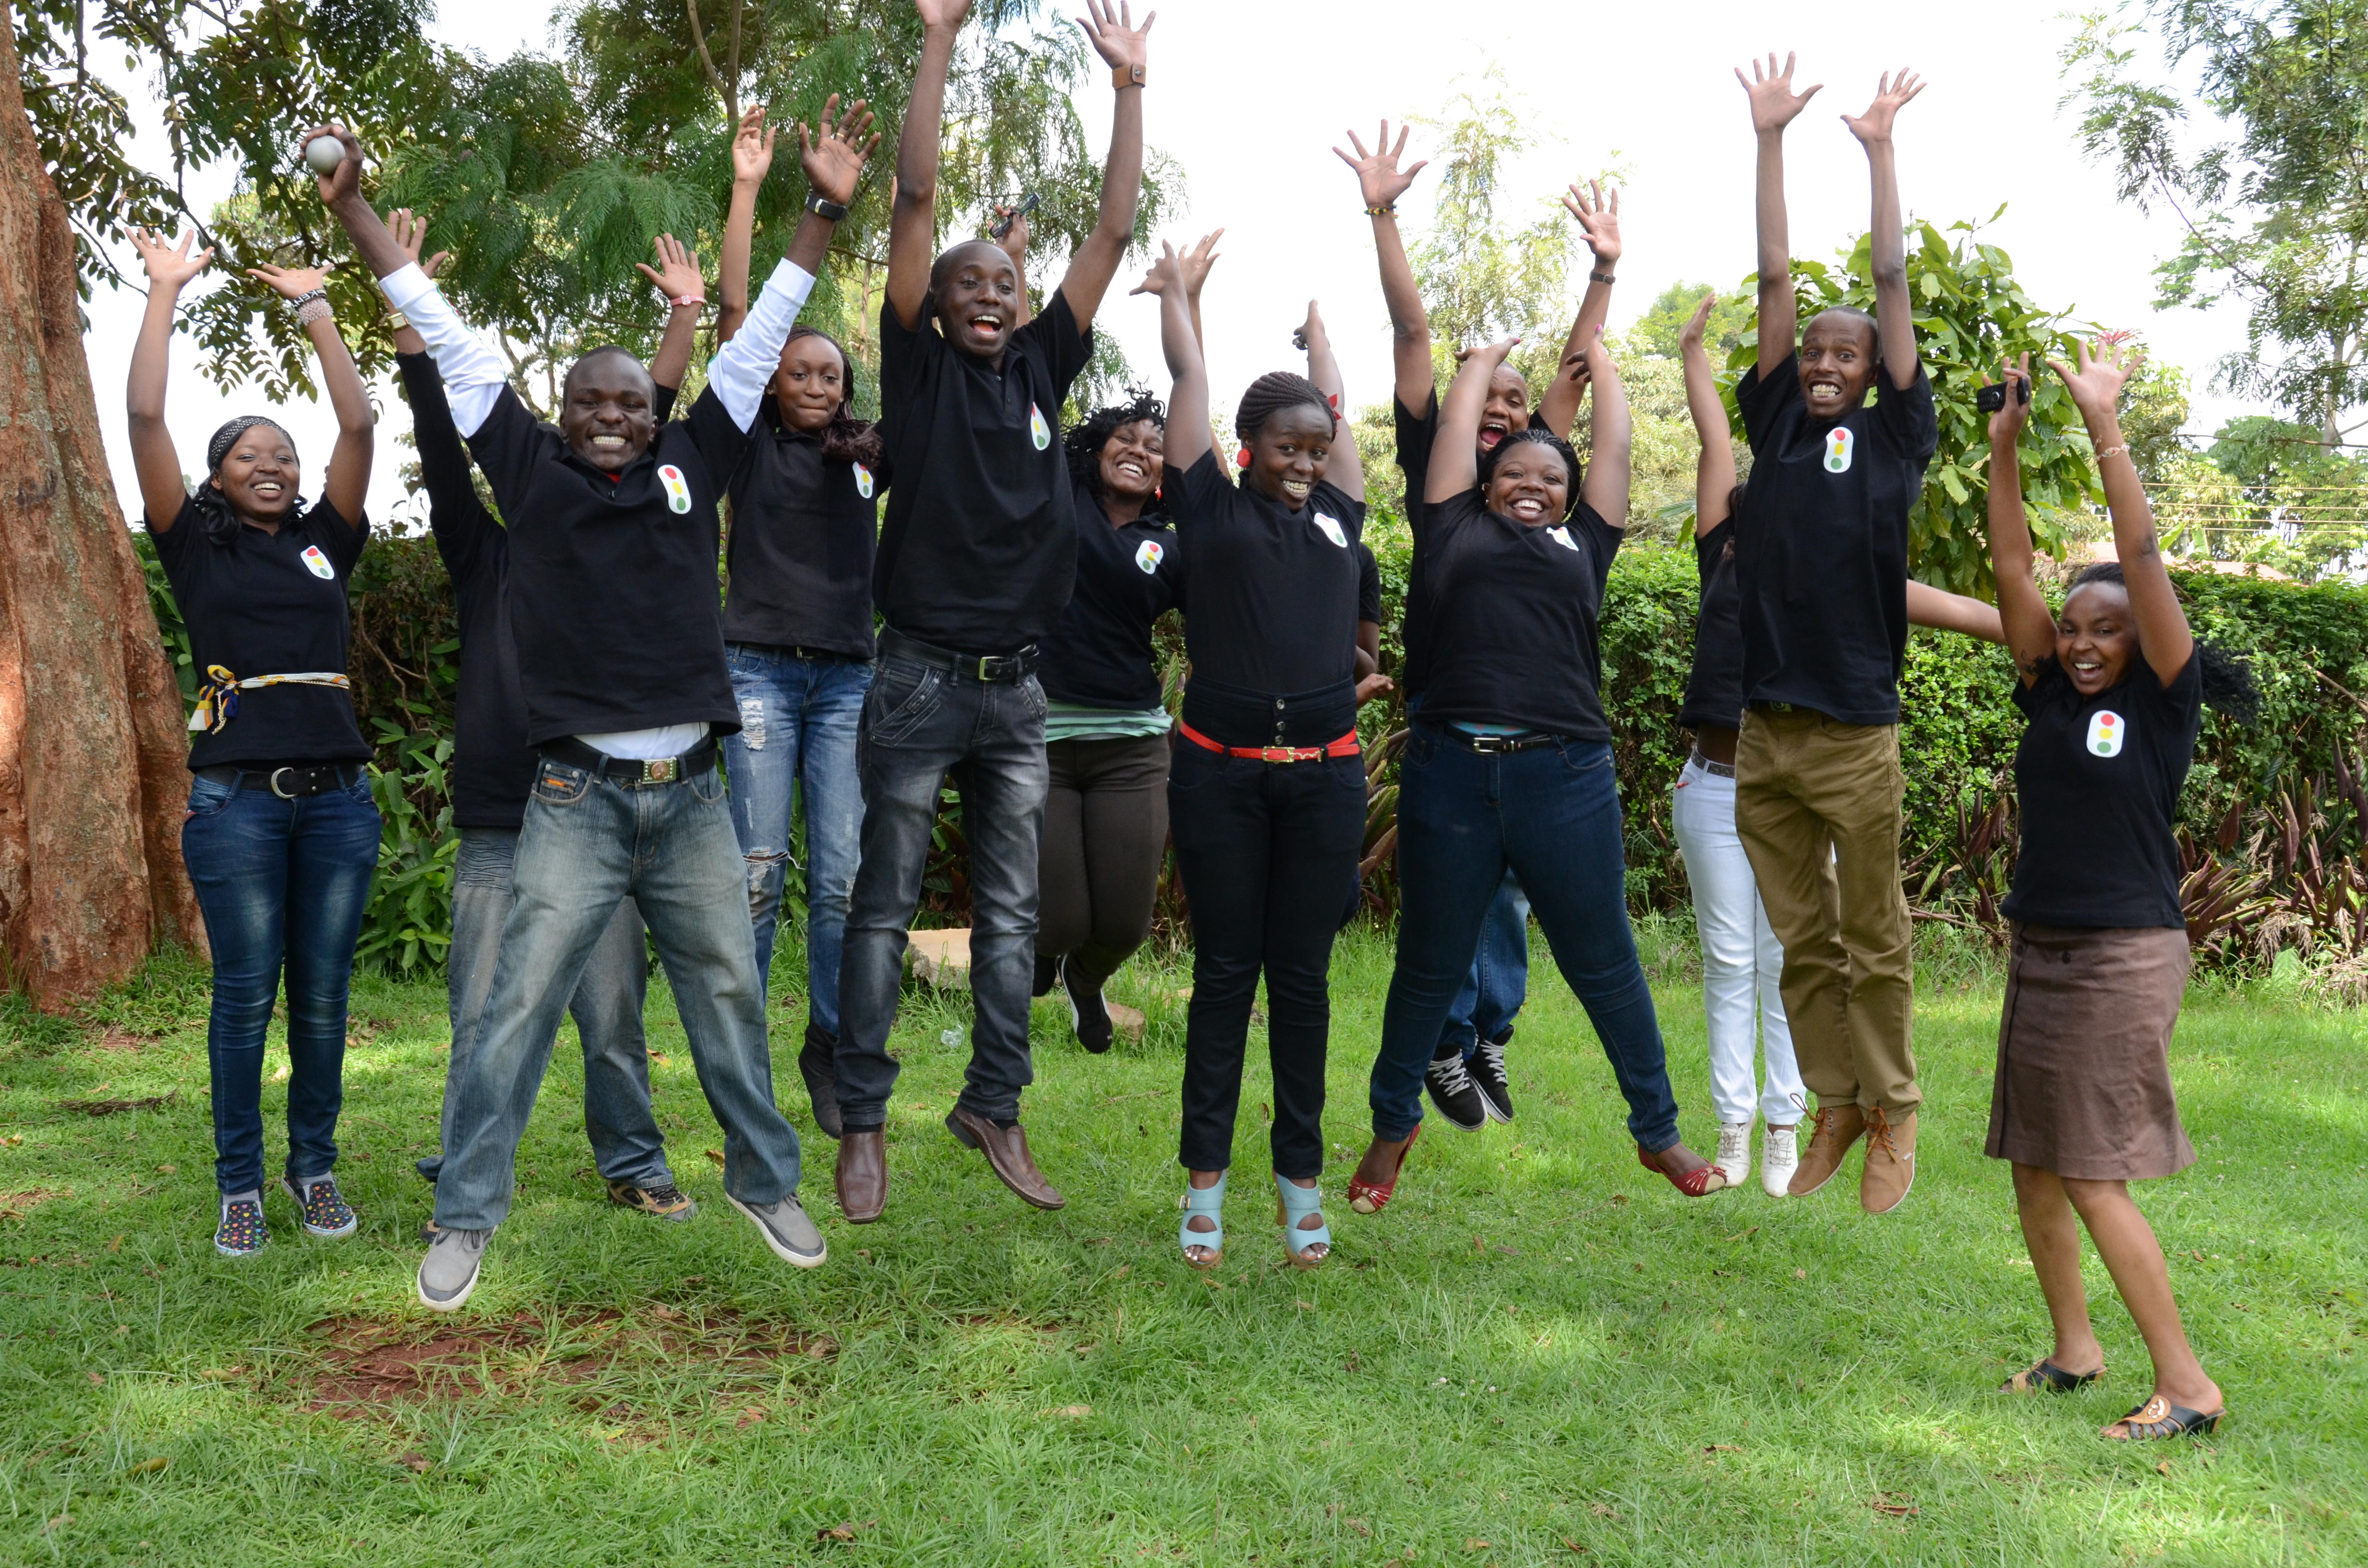 Youth leaders celebrate completing their first workshops at Red Cross in Nairobi, Kenya